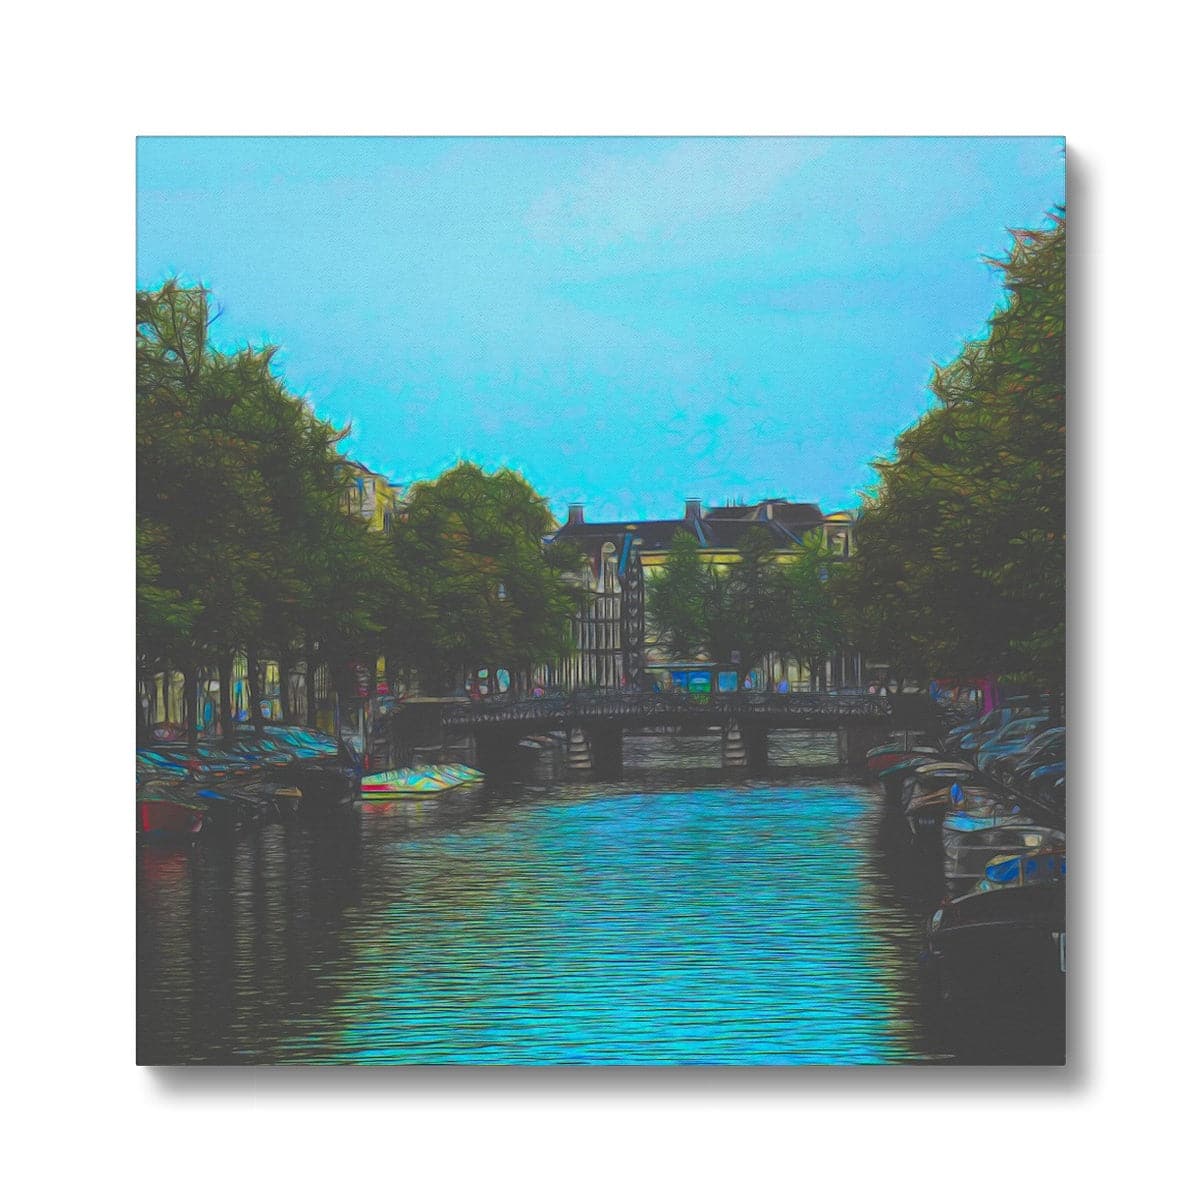 Amsterdam Canal, Art on Canvas, by Sensus Studio